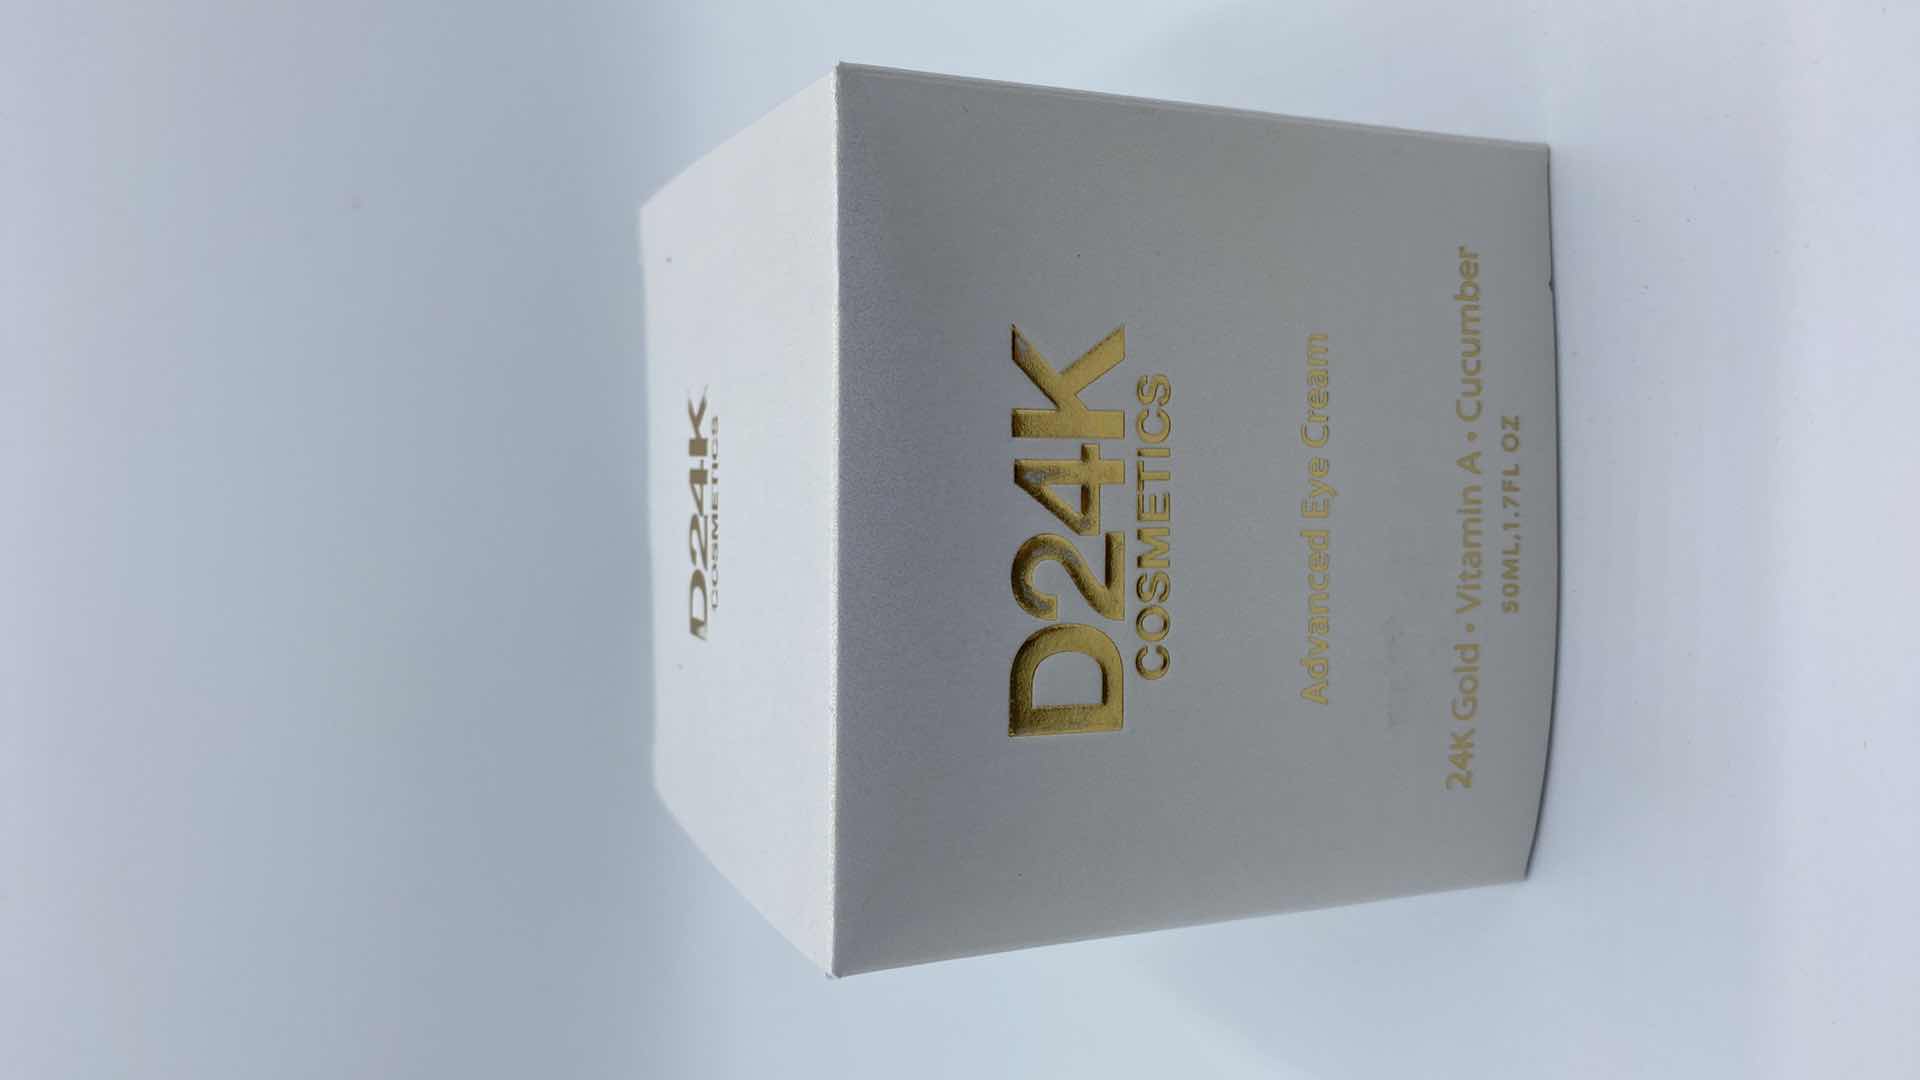 Photo 3 of NEW D24K ADVANCED EYE CREAM - SLOWS DEPLETION OF COLLAGEN AND STIMULATES CELL GROWTH FOR PLUMP LIFTED HYDRATED SKIN